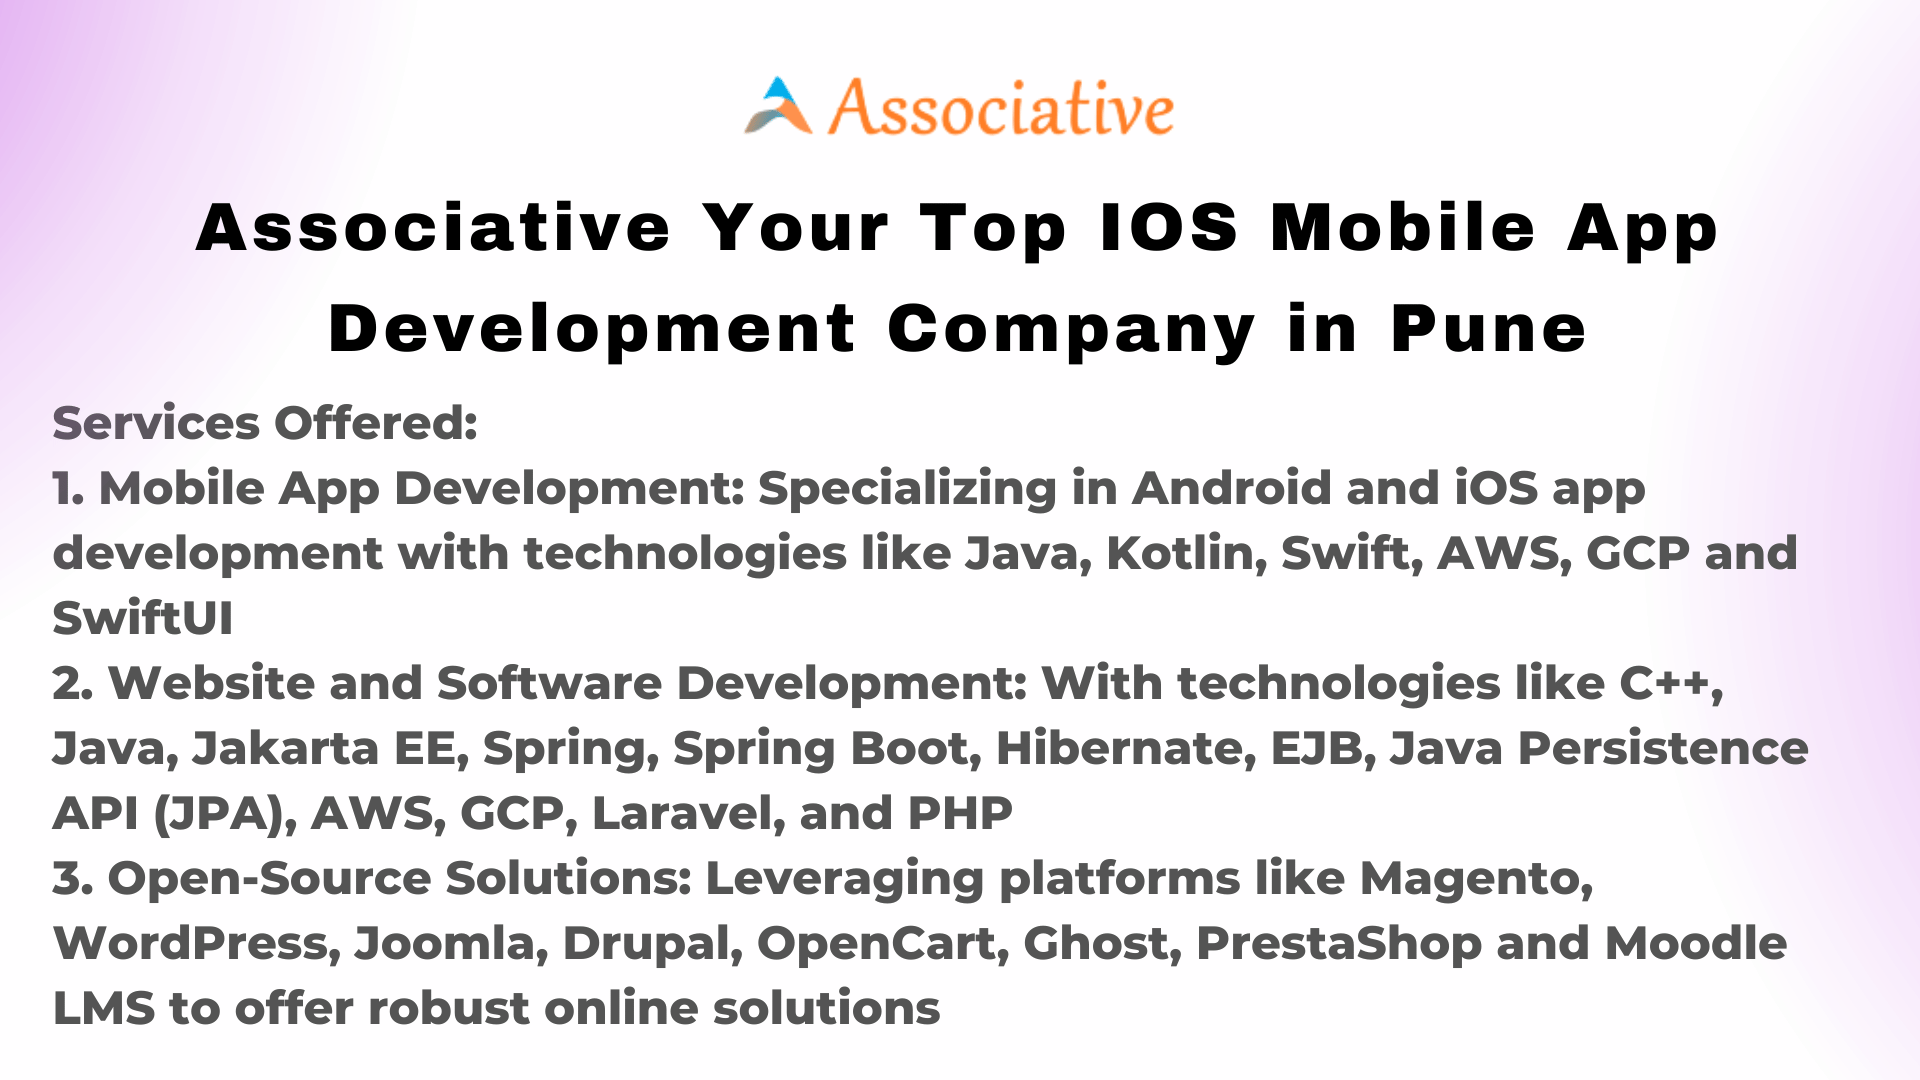 Associative Your Top IOS Mobile App Development Company in Pune